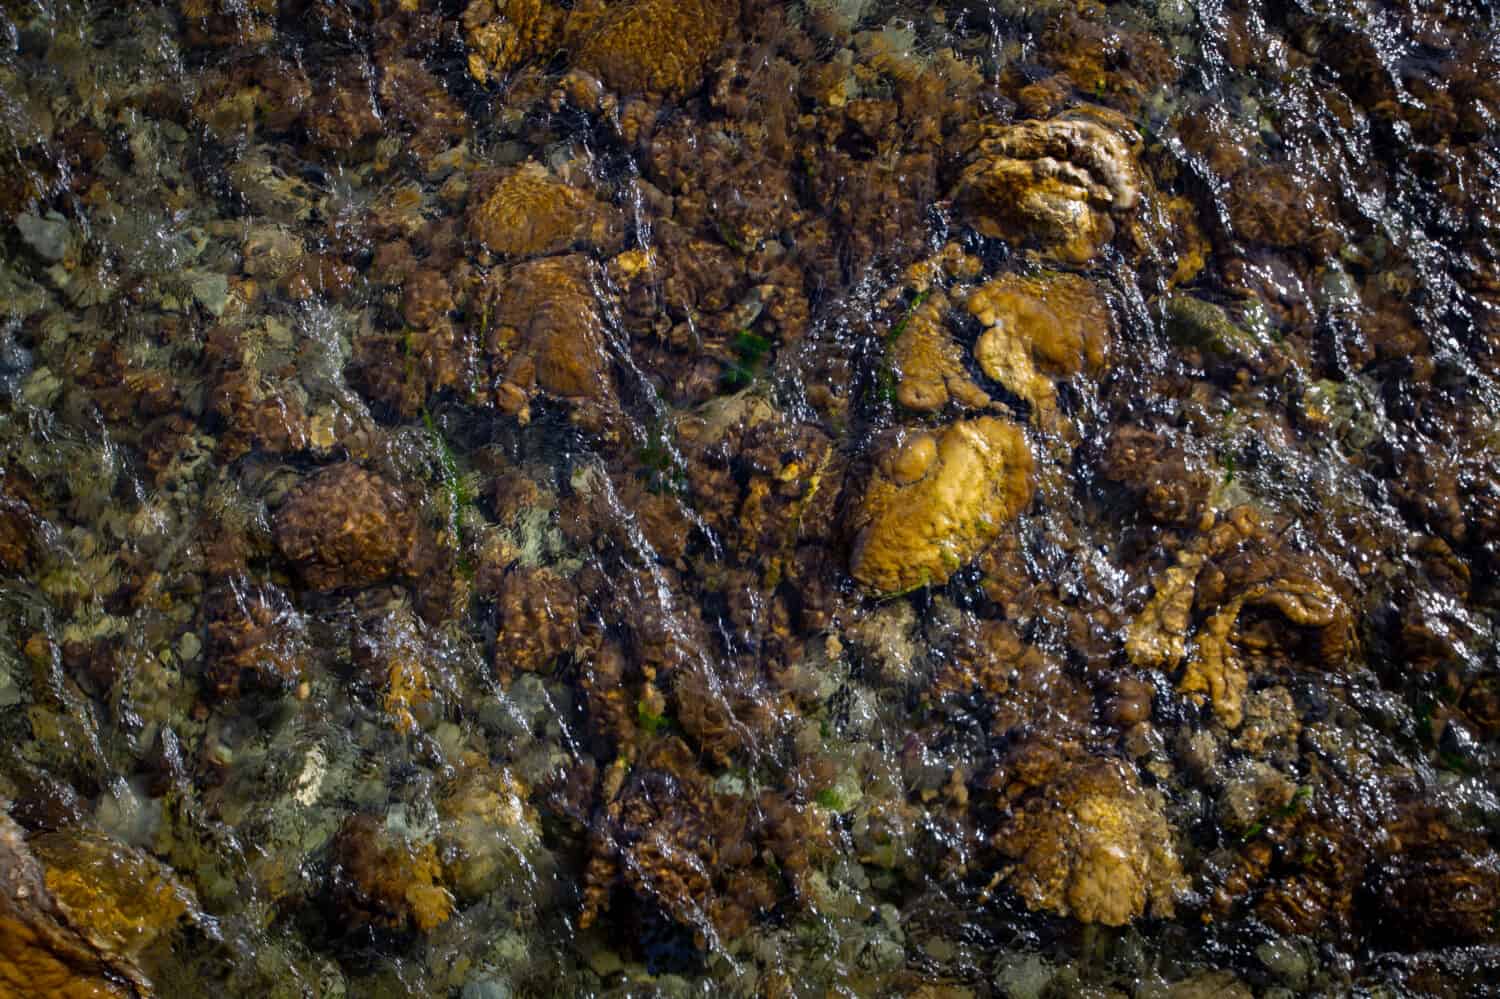 Didymo or rock snot is an algae that spreads and forms thick mats along river beds, disturbing the habitat of native fish and insect life